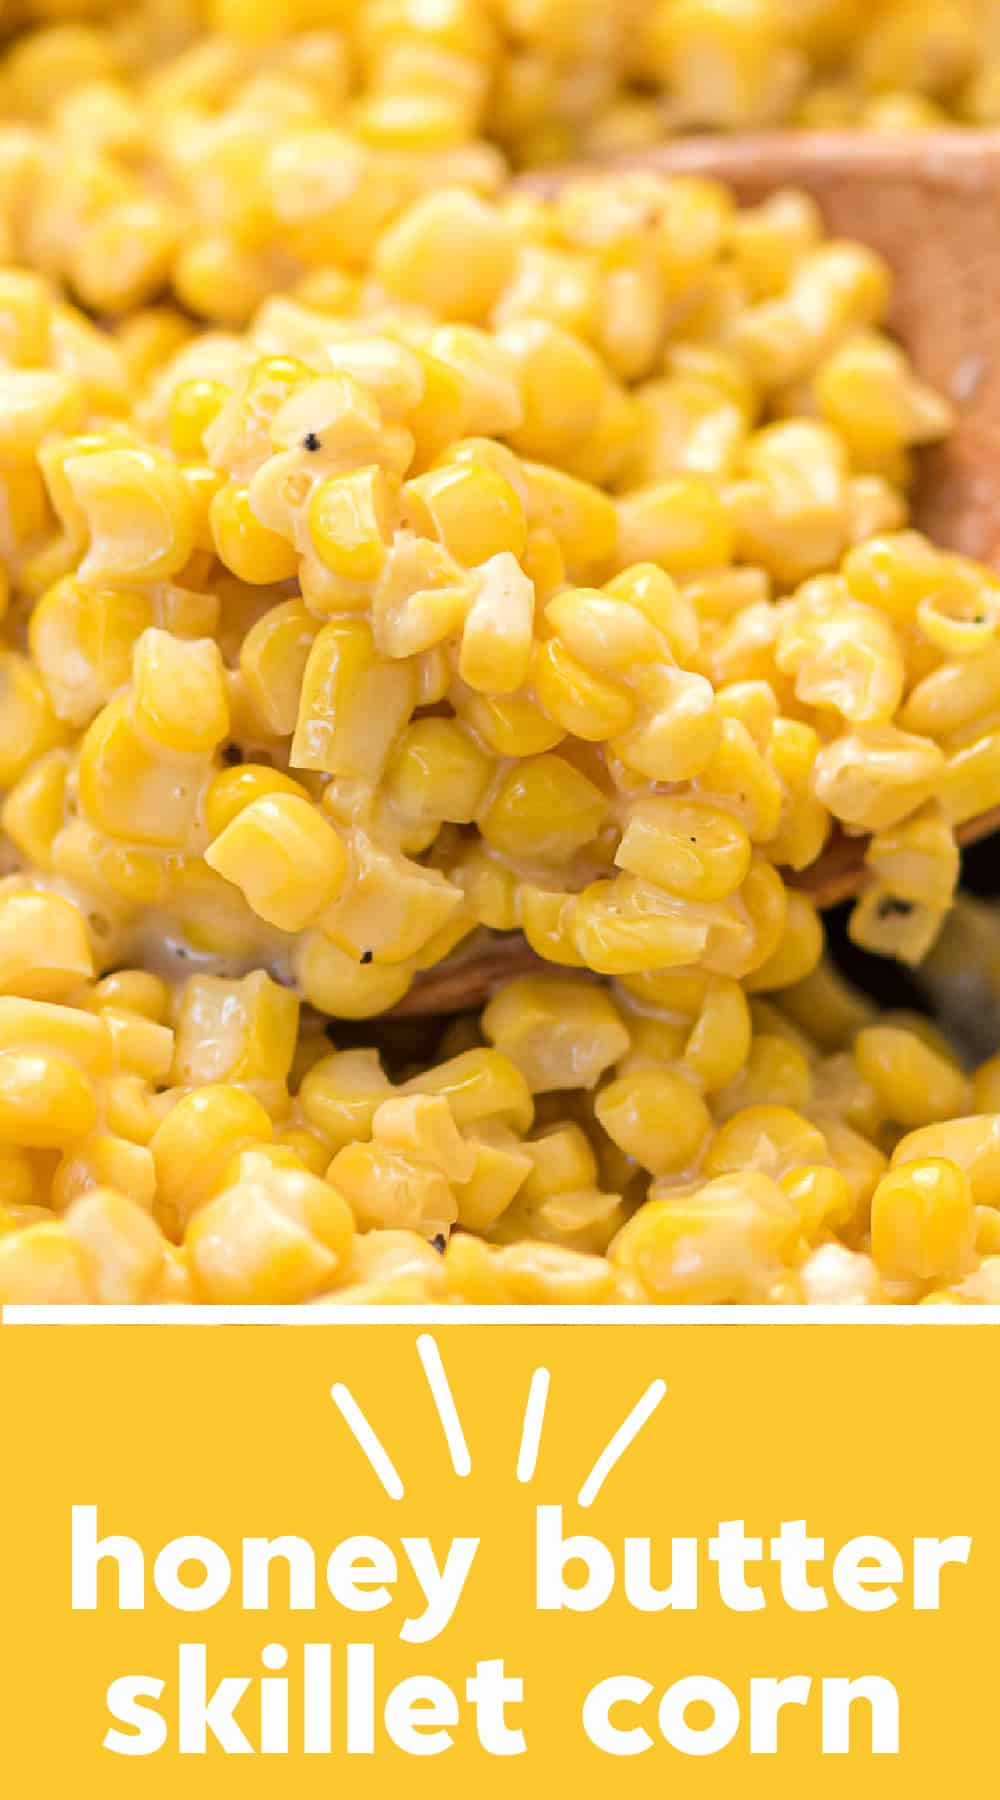 image with text "honey butter skillet corn"